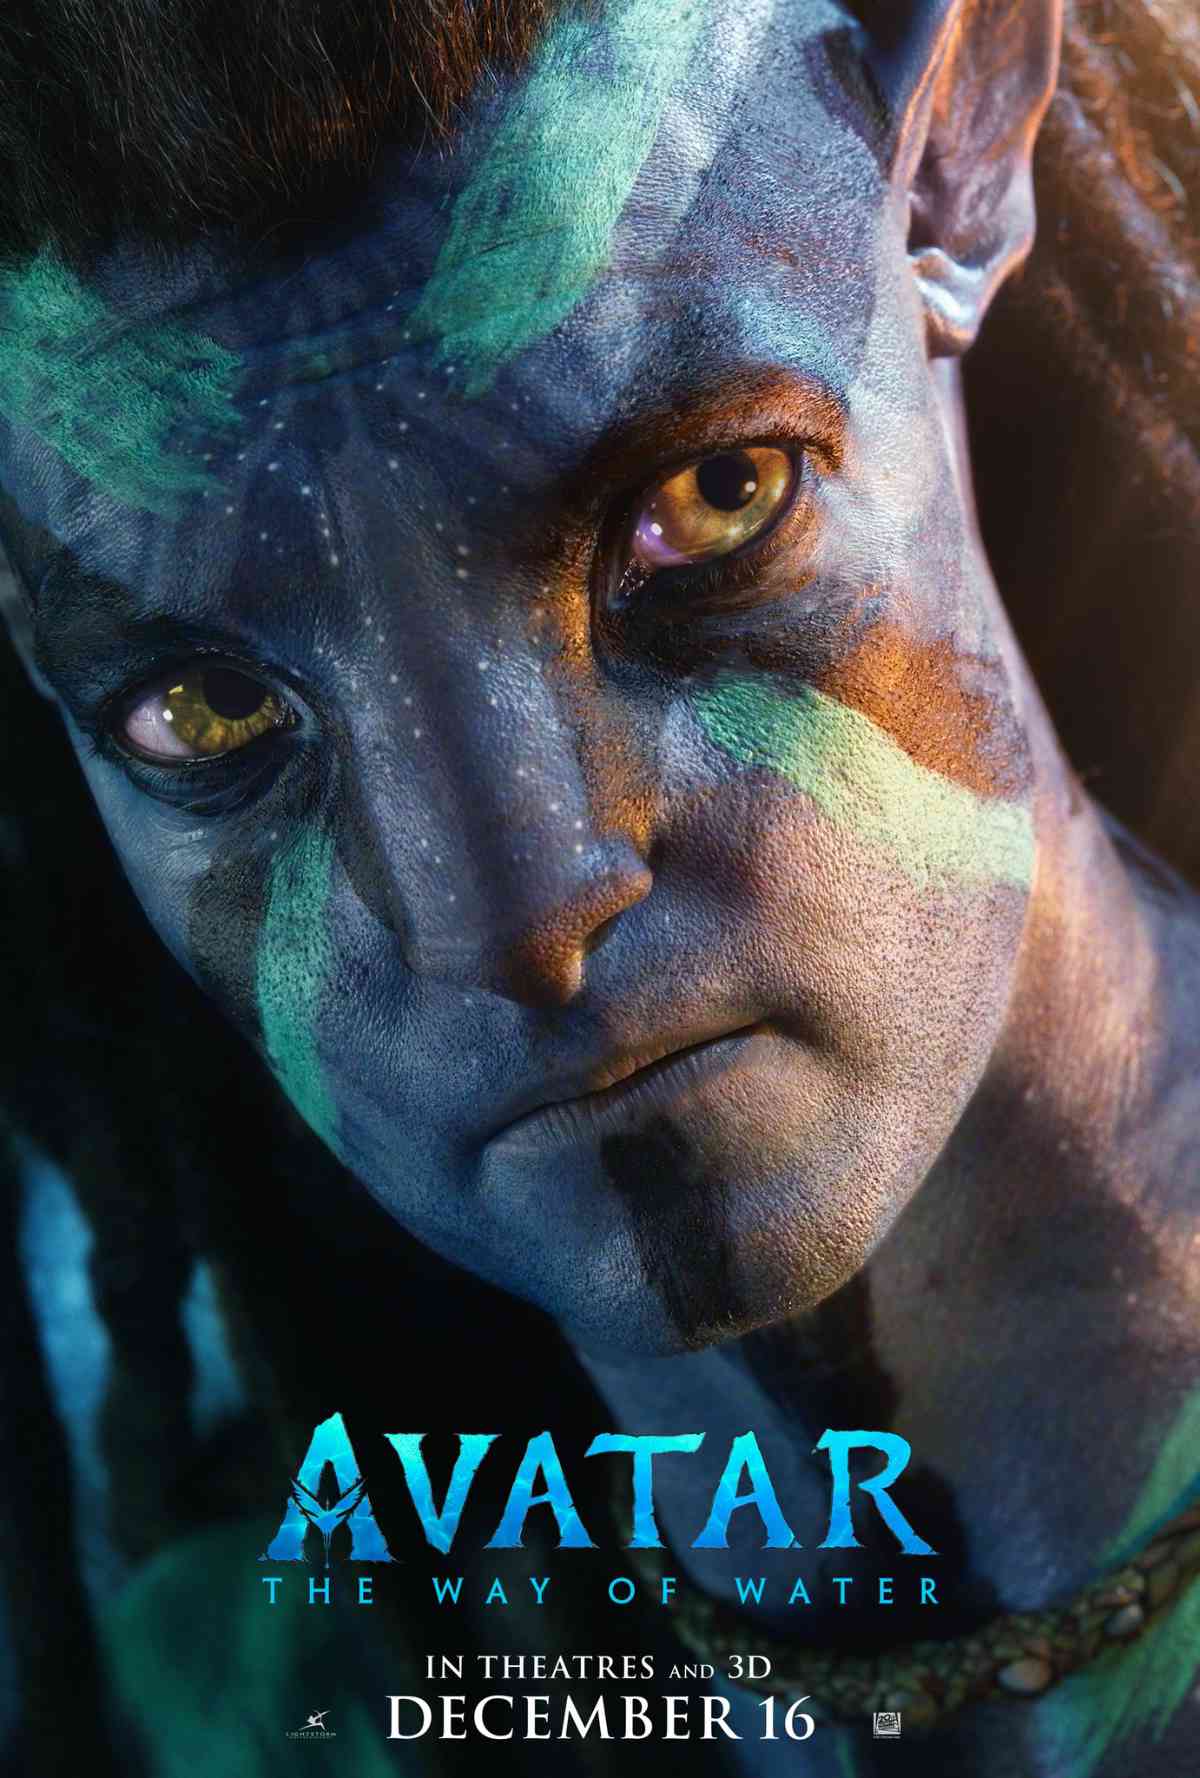 Way of Water Poster